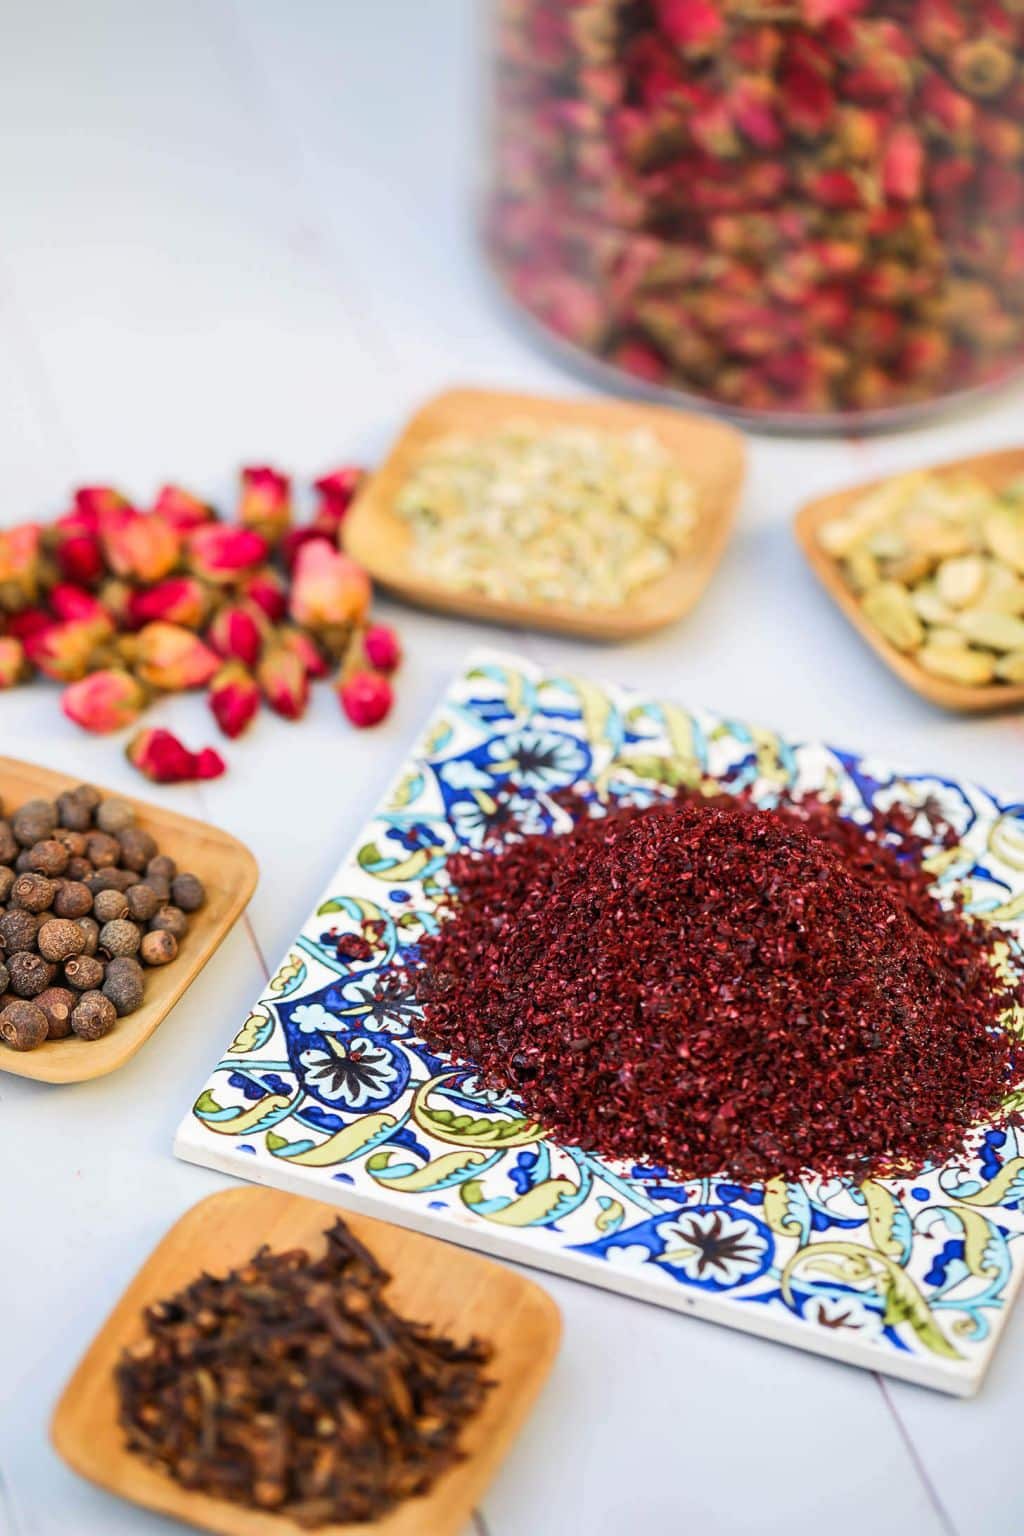 https://www.cheftariq.com/wp-content/uploads/2020/11/middle-eastern-spices-2.jpg